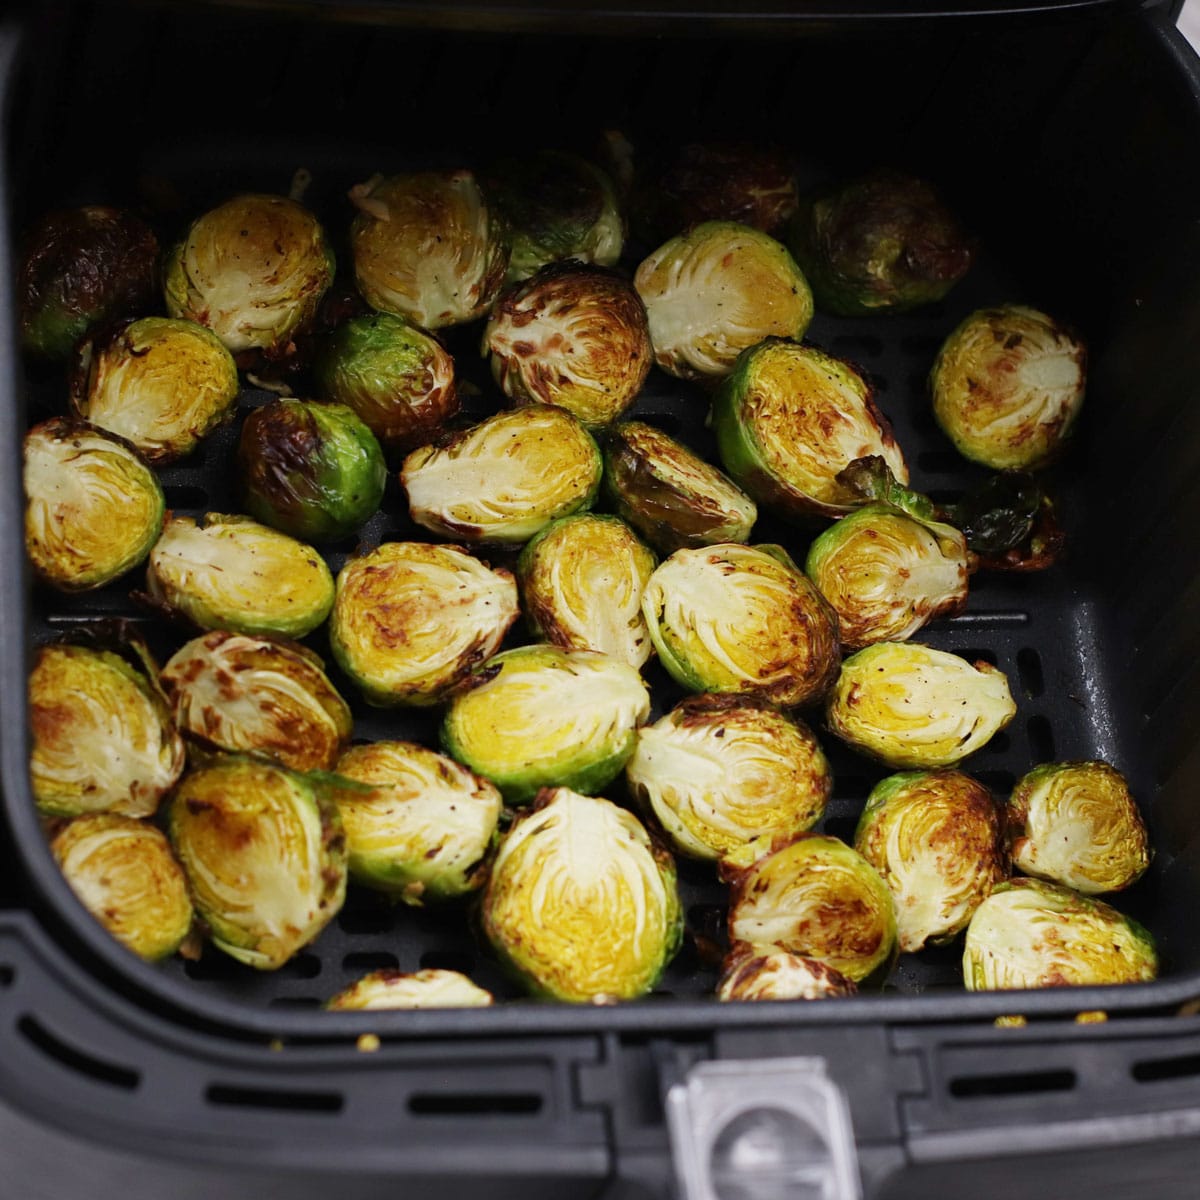 Cooking Brussels sprouts in air fryer